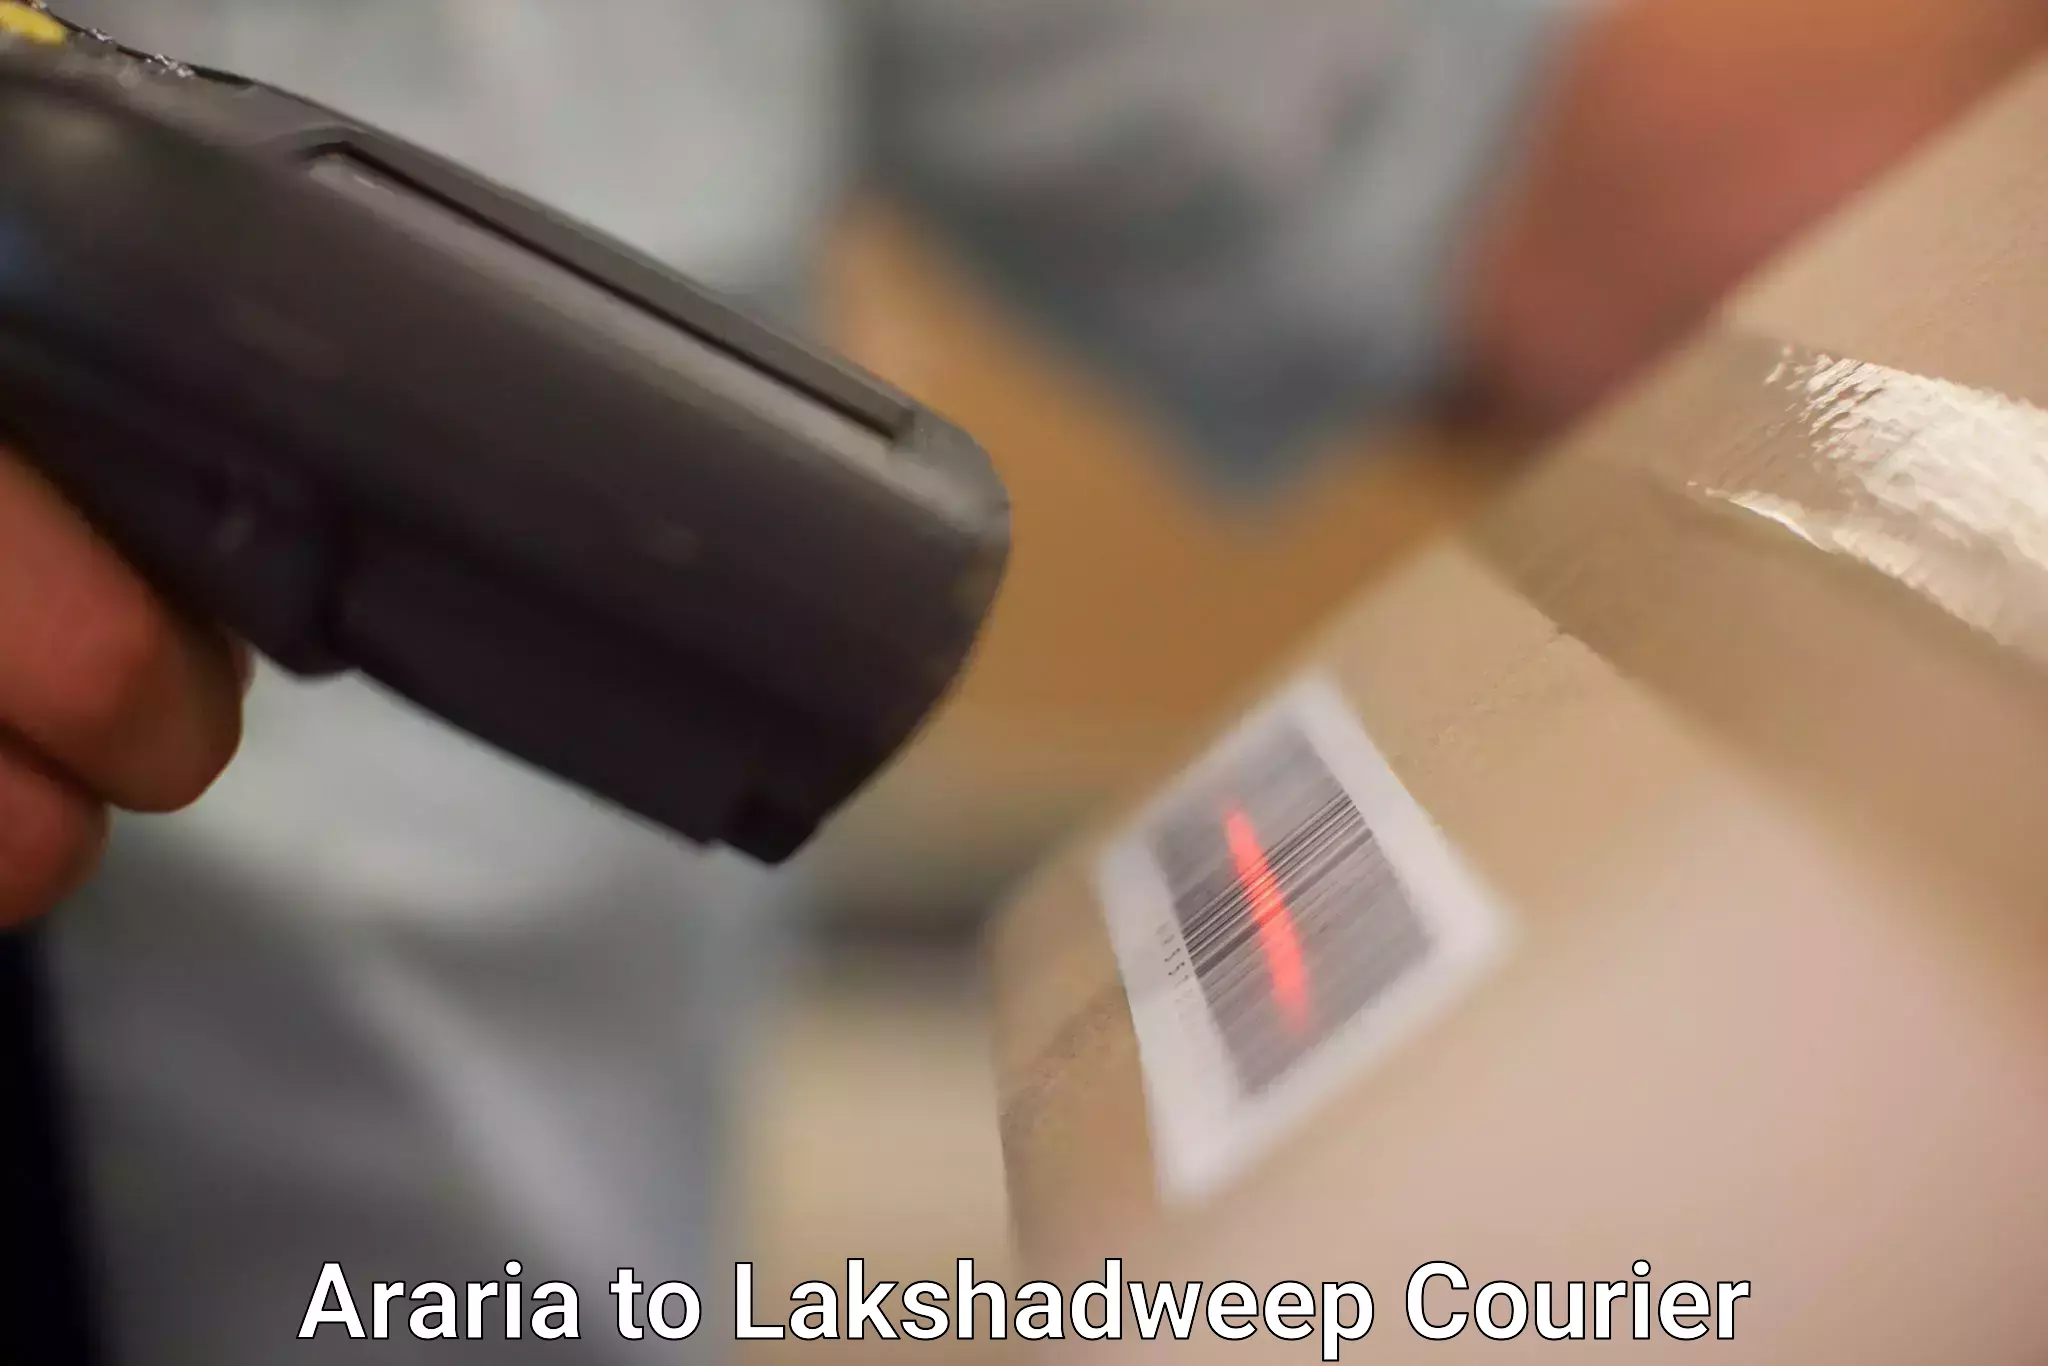 Full-service courier options Araria to Lakshadweep